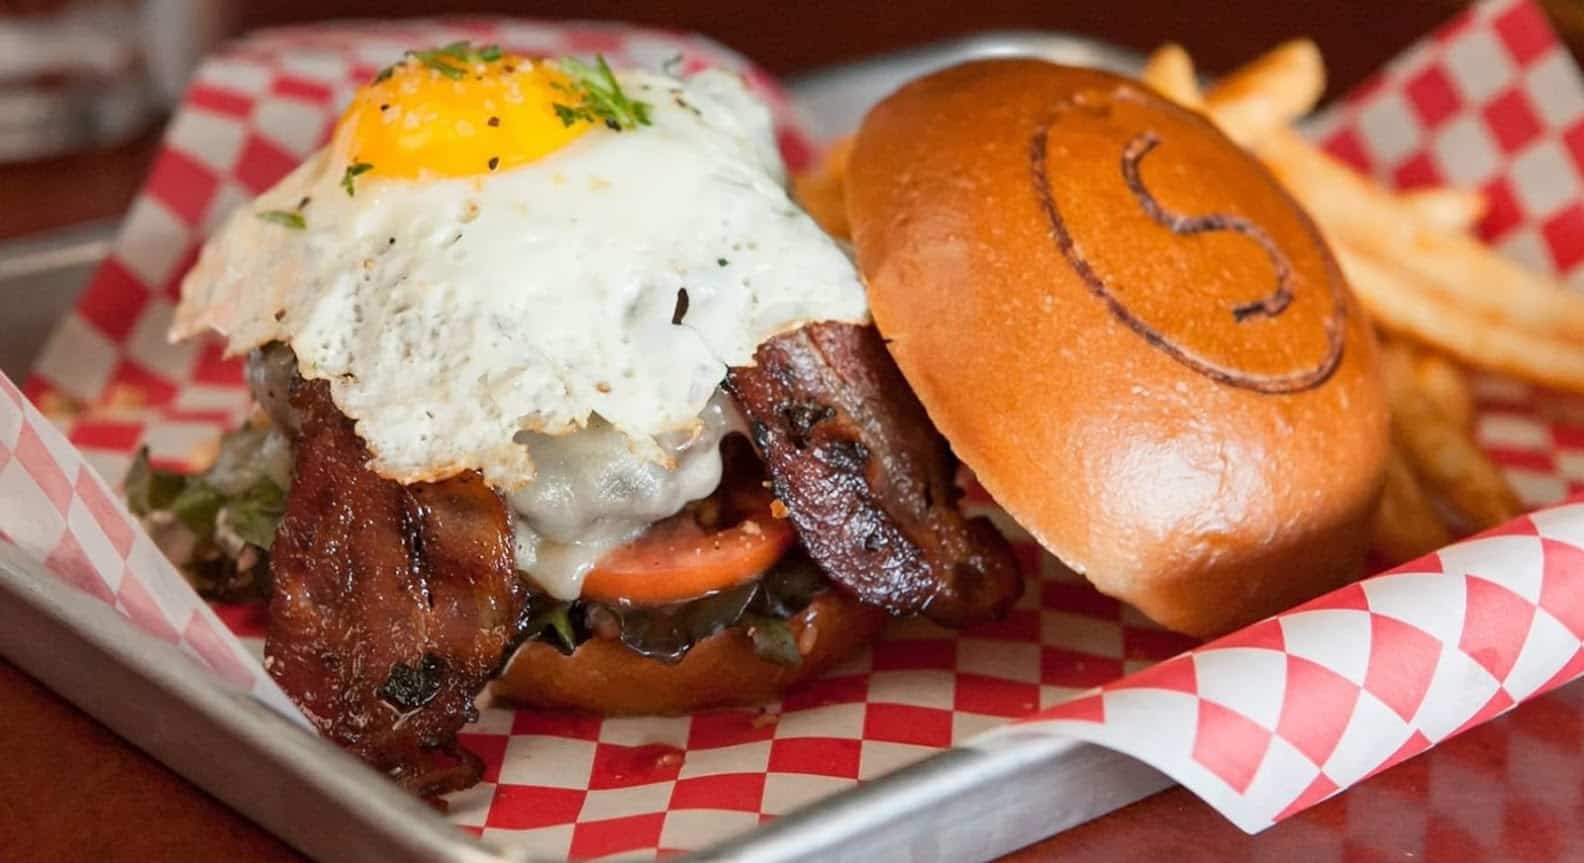 From our best burgers in Cincinnati list comes this burger topped with bacon and eggs, photo credit to Sammy's Craft Burgers